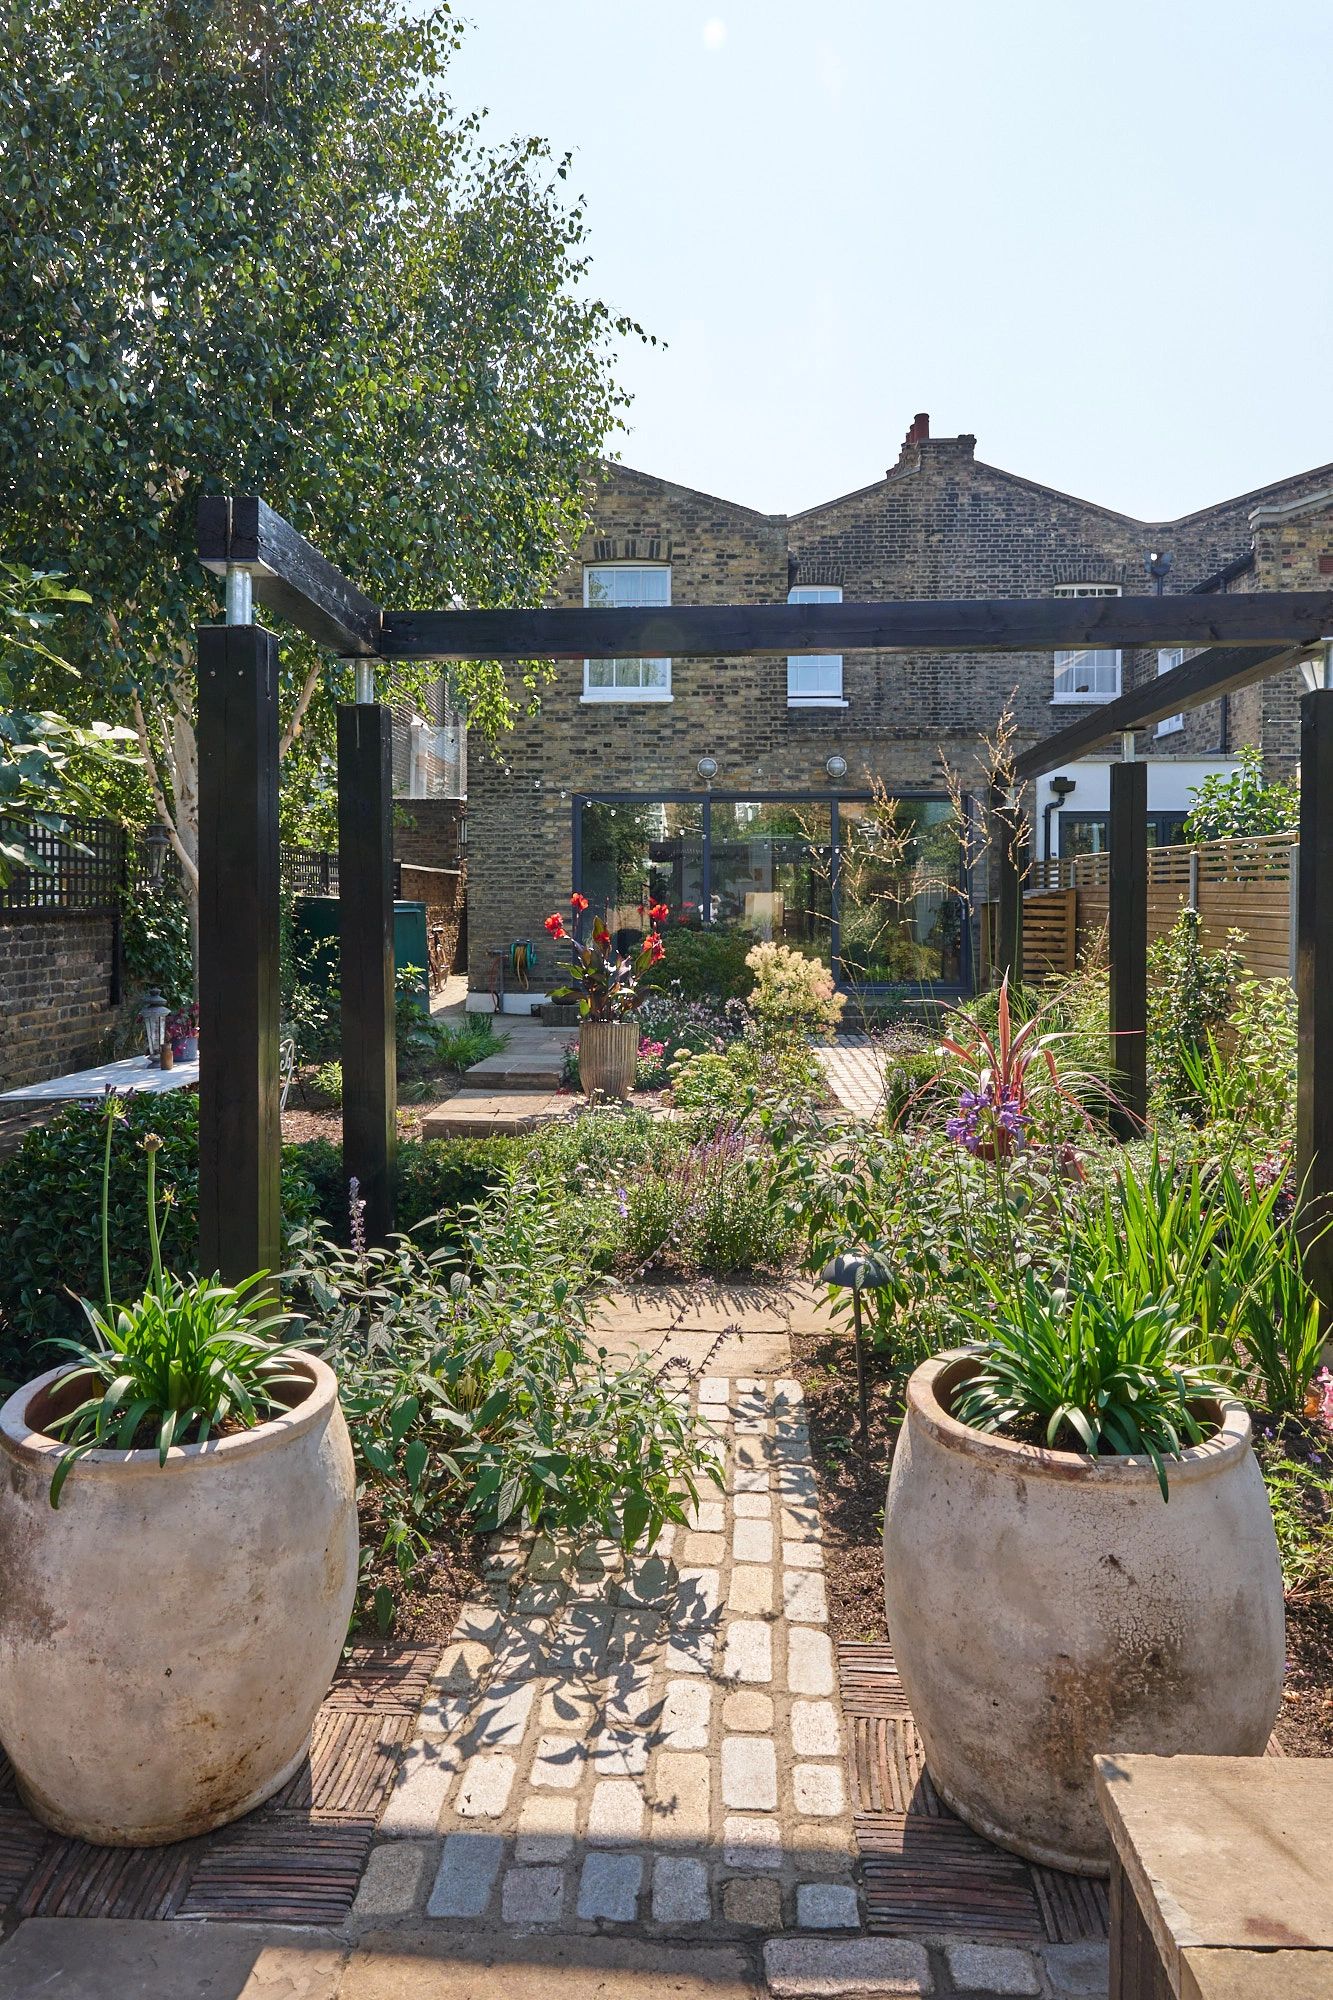 City garden with large pots, cobble pathway, pond and black pergola